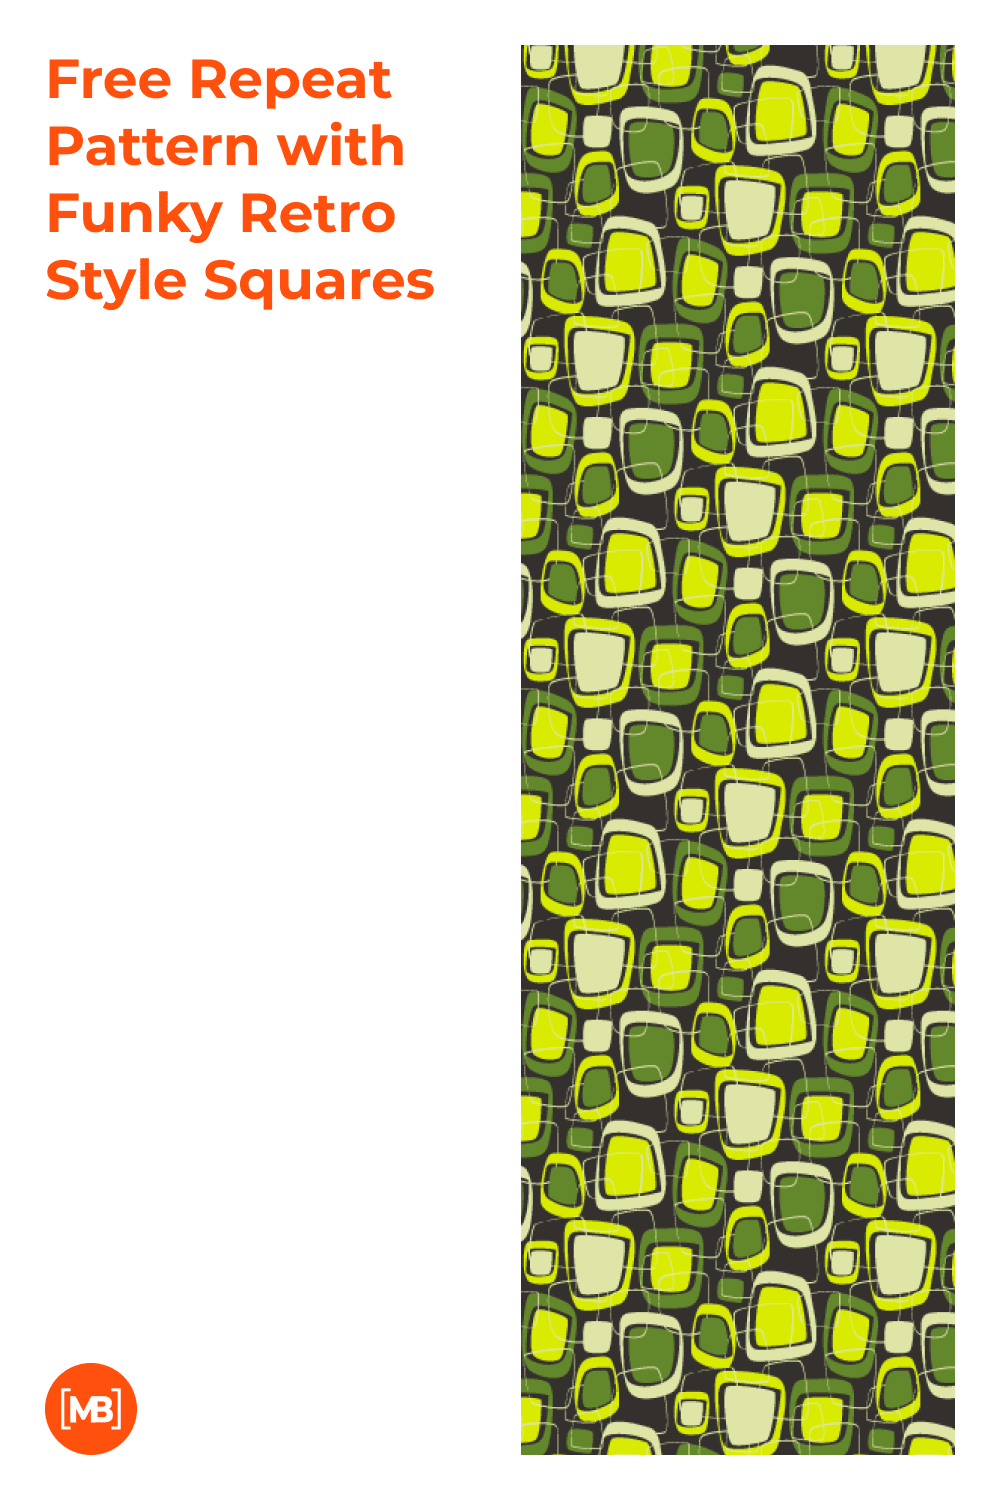 Free Repeat Pattern with Funky Retro Style Squares.